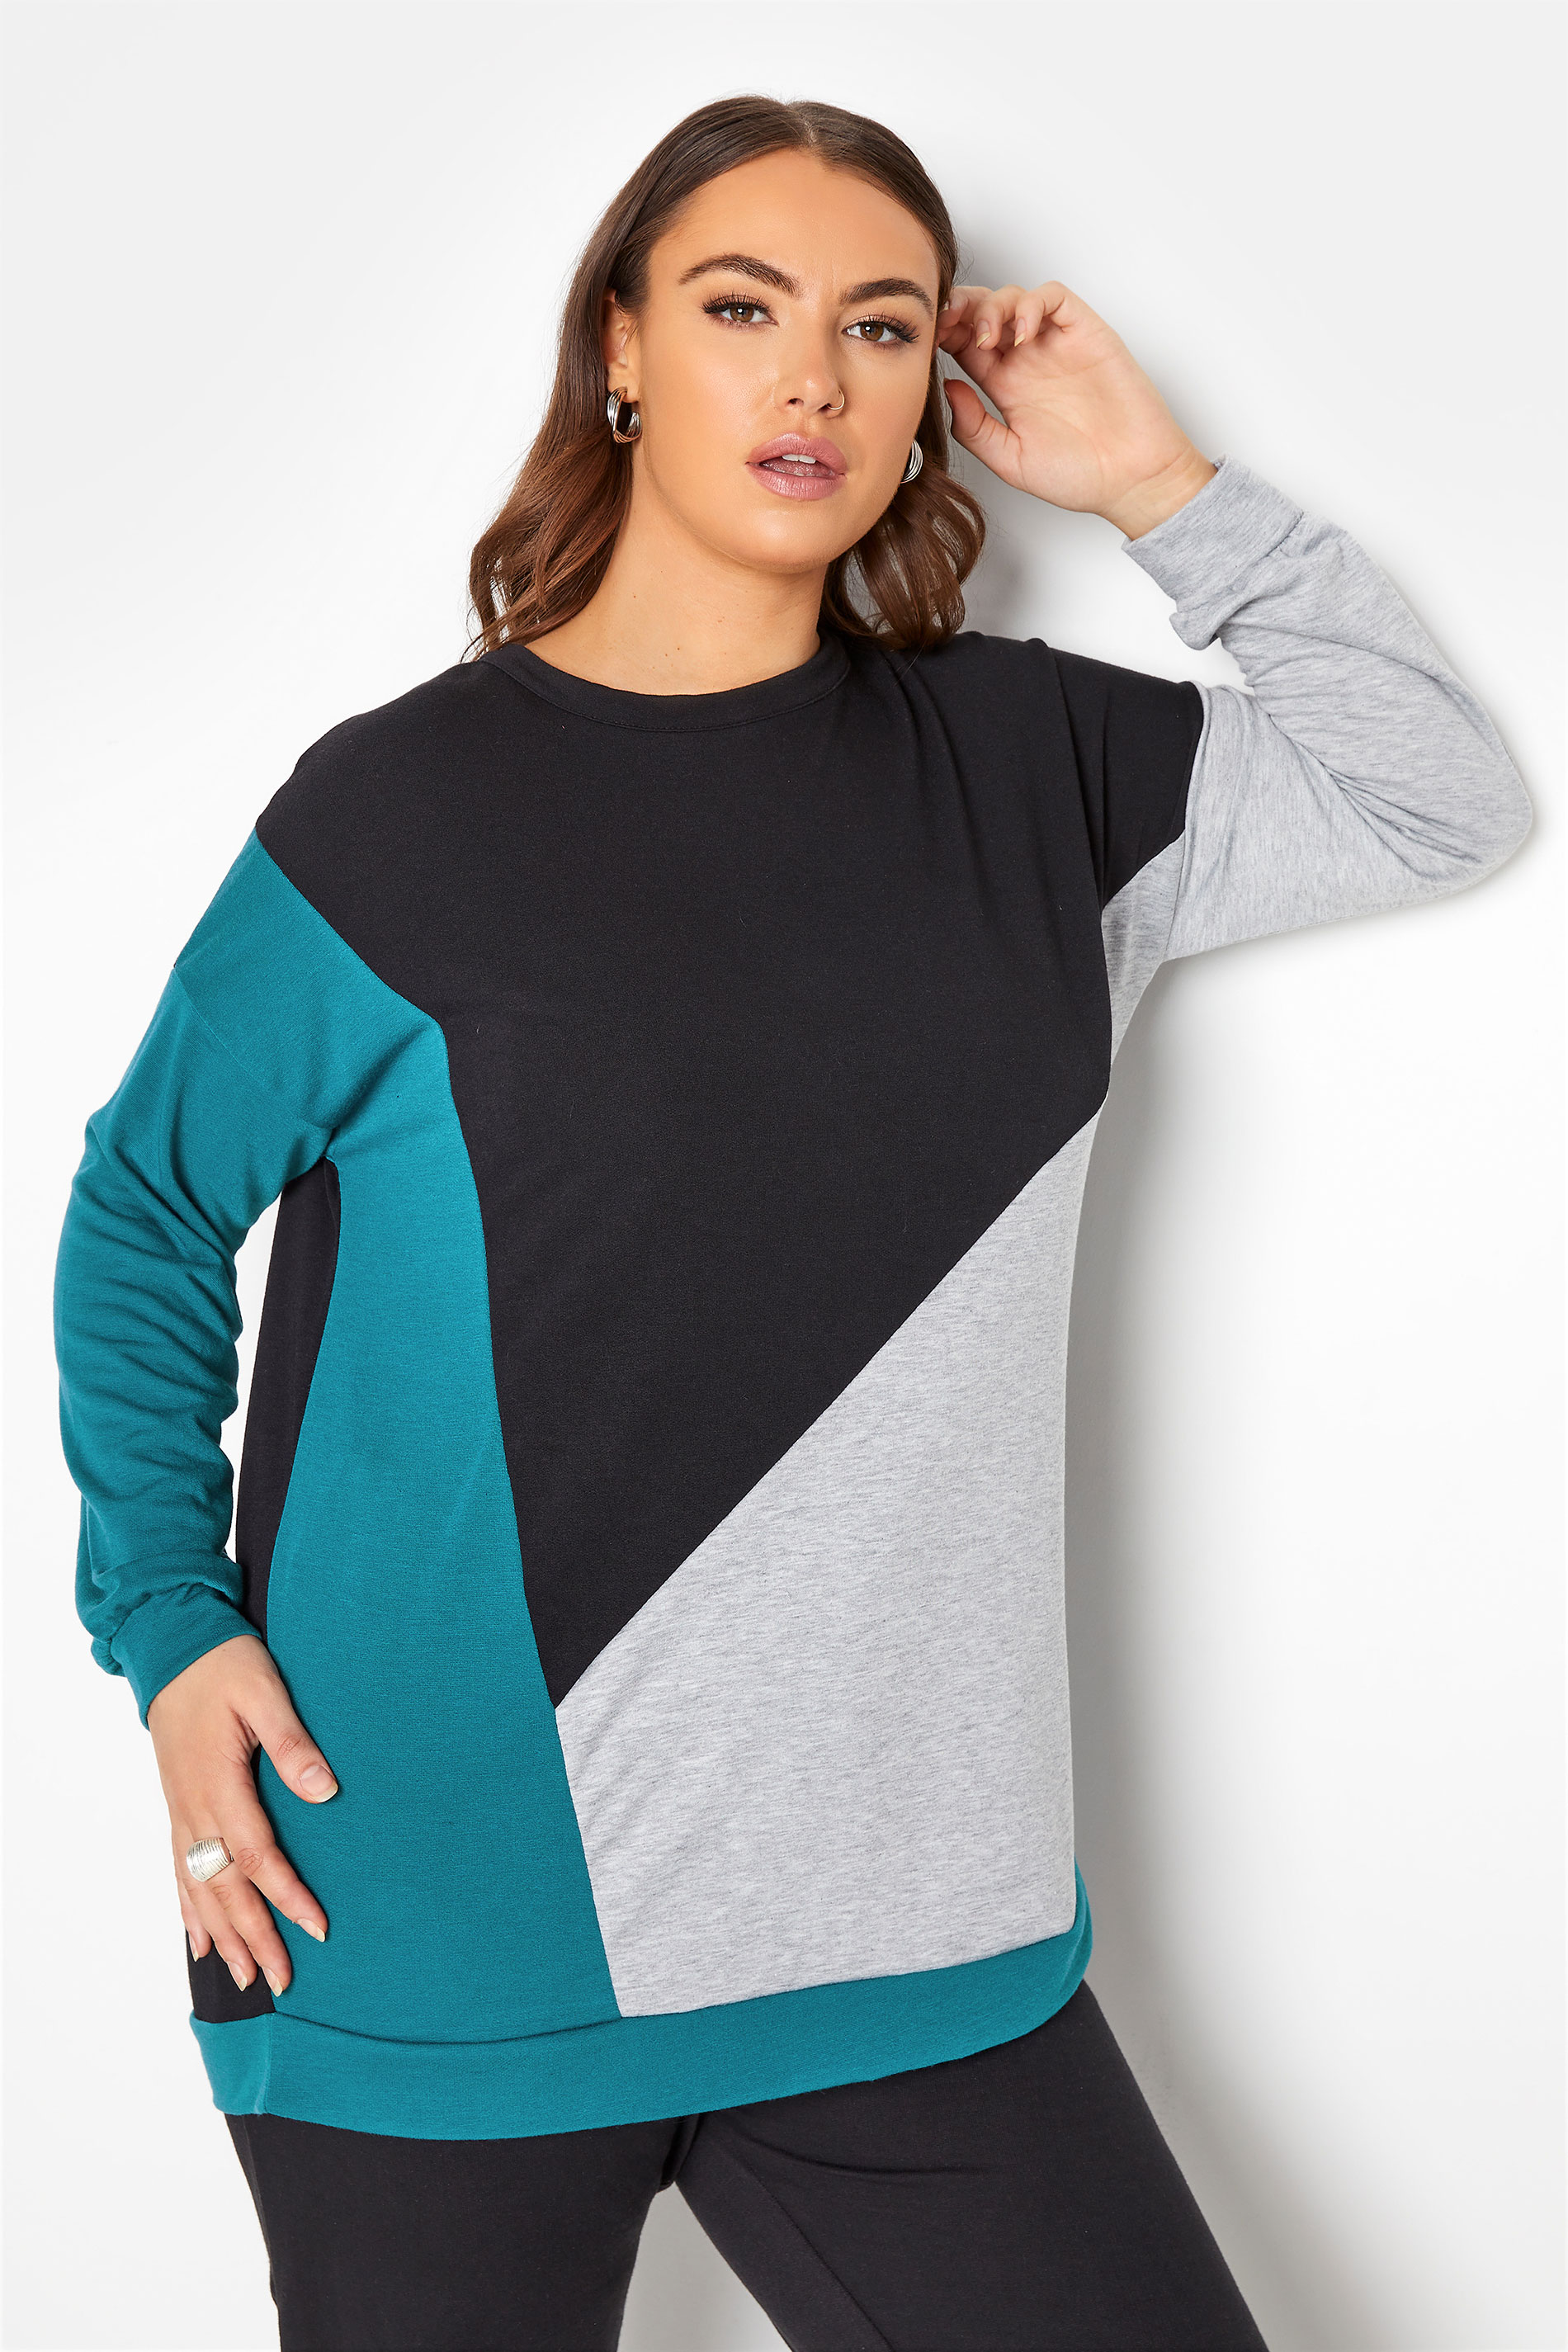 LIMITED COLLECTION Teal & Black Colour Block Sweatshirt_A.jpg